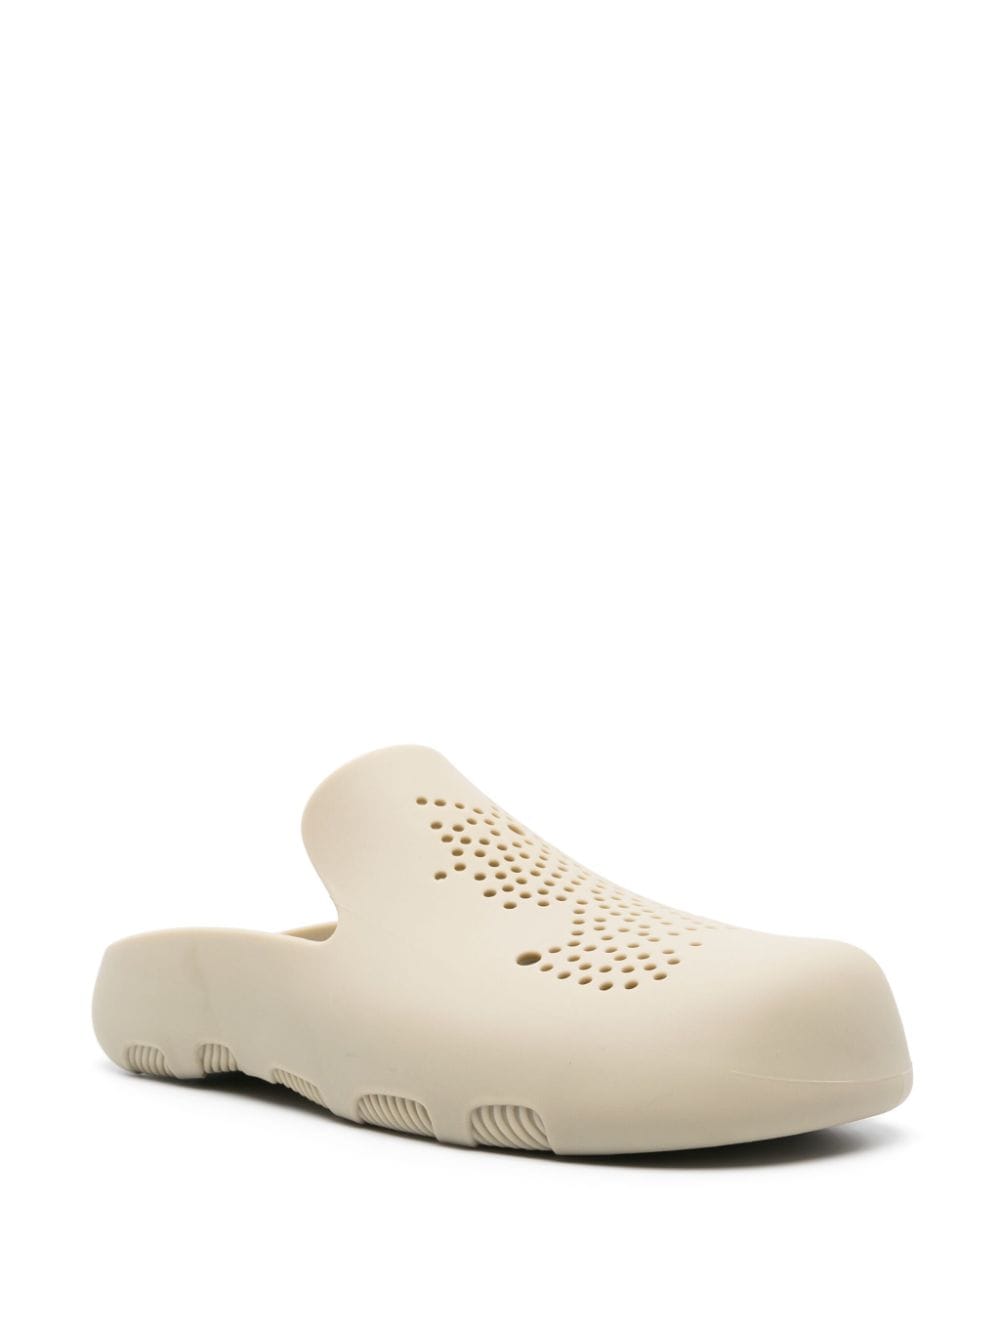 Burberry Stingray perforated clogs - Beige